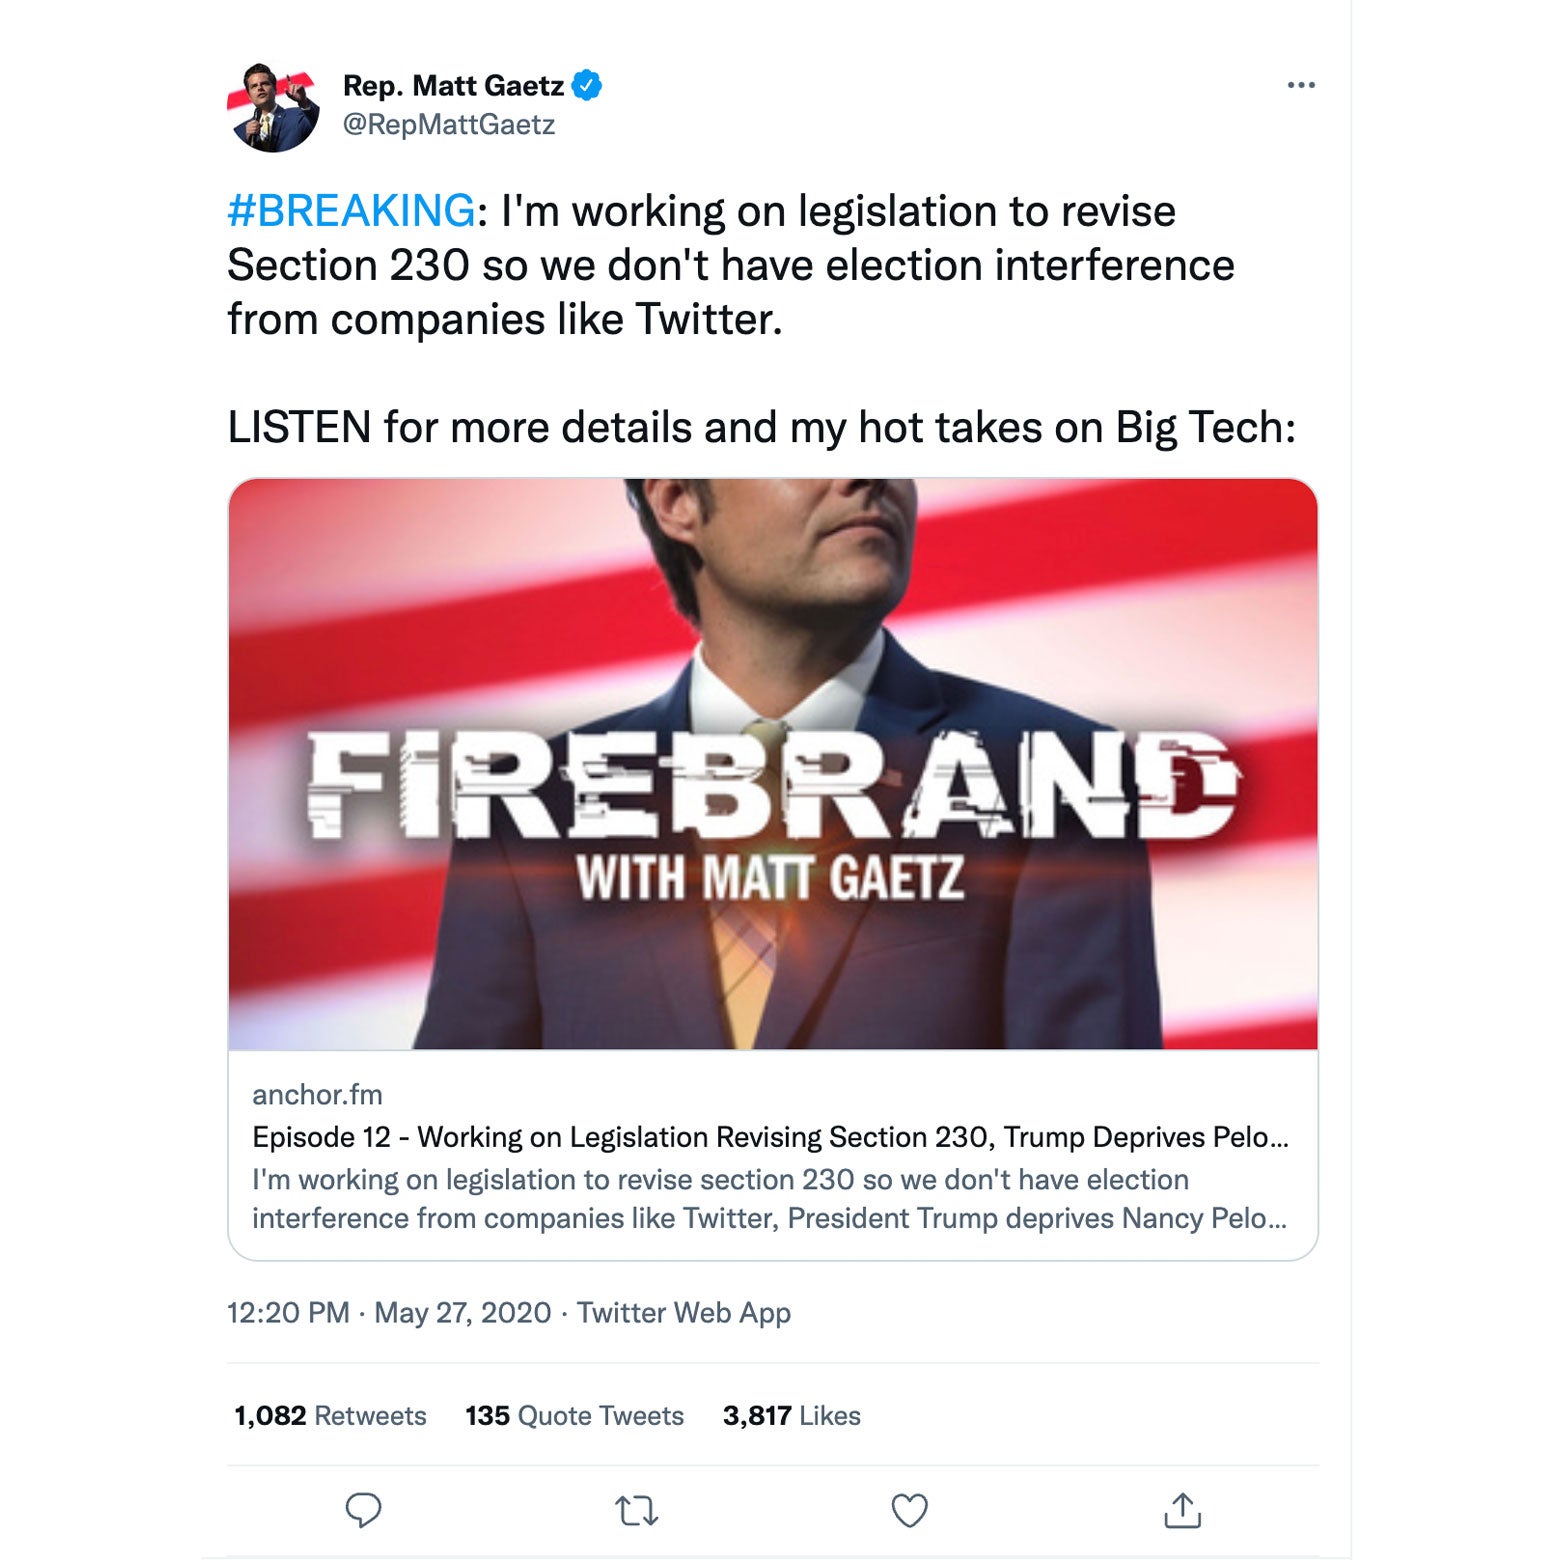 A tweet from Matt Gaetz says: "#BREAKING: I'm working on legislation to revise Section 230 so we don't have election interference from companies like Twitter. LISTEN for more details and my hot takes on Big Tech." The tweet links to a podcast that says FIREBRAND with Matt Gaetz, described as "Episode 12 - Working on legislation revising Section 230, Trump deprives ... "